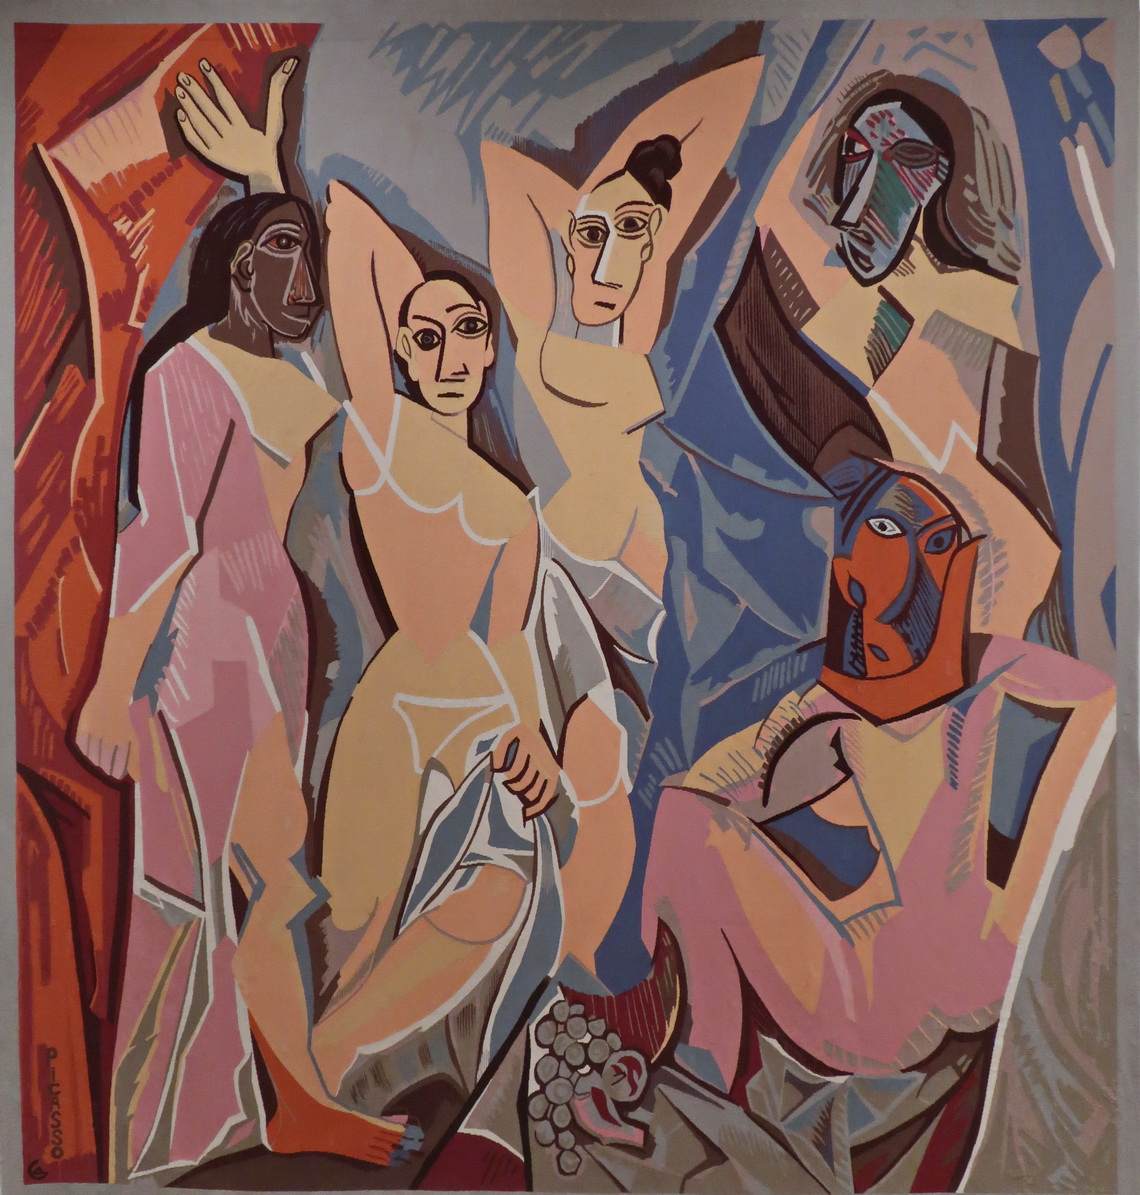 Women Les Demoiselles d’Avignon painted by Pablo Picasso in the year 1907